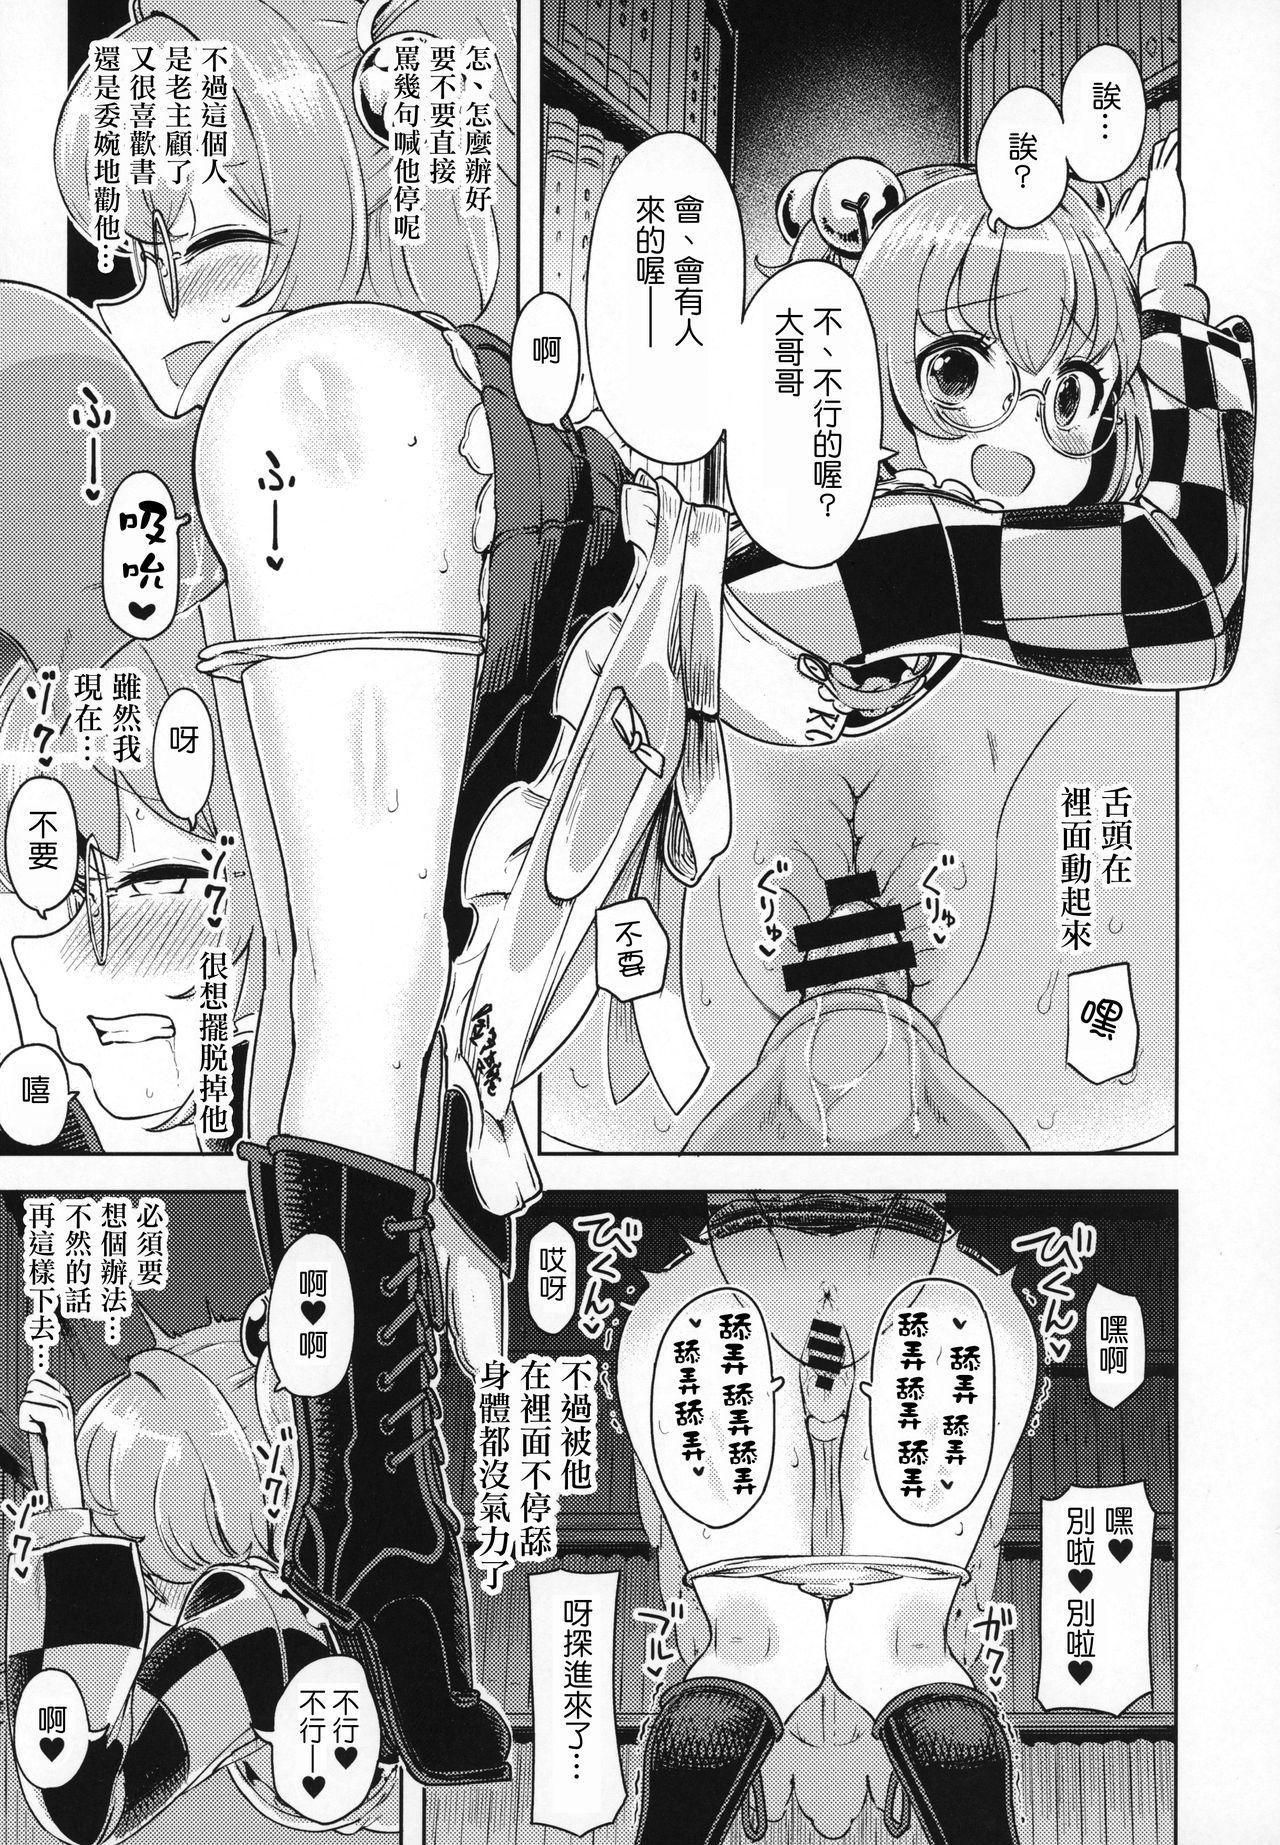 Ngentot Suzunaan no Erohon - Touhou project Gay 3some - Page 2